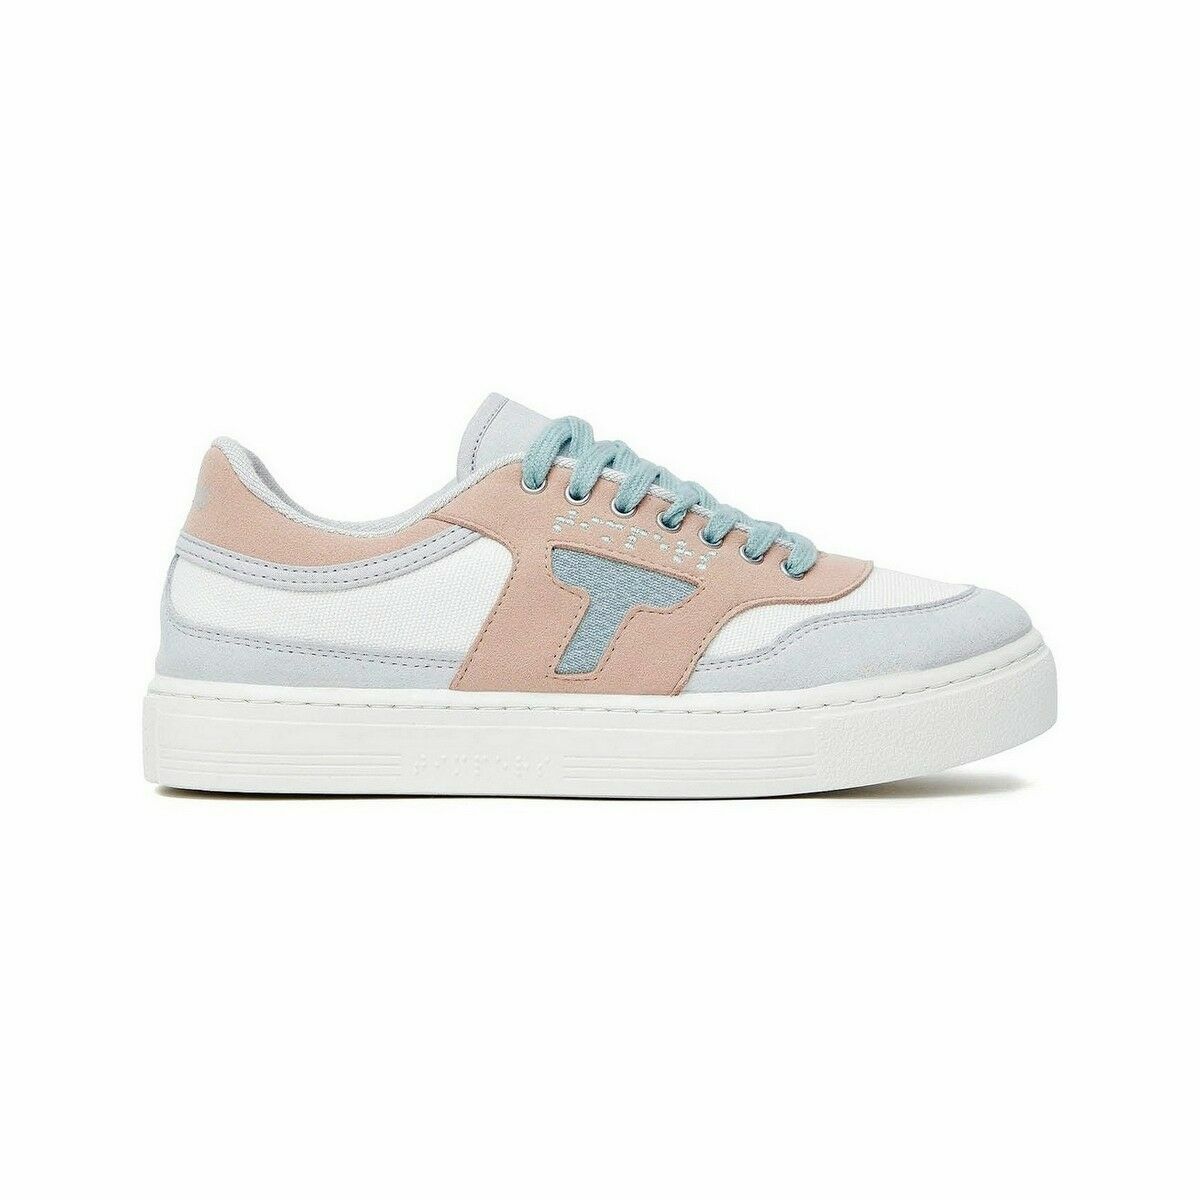 Chaussures casual unisex Timpers Trend Vitruvio Rose